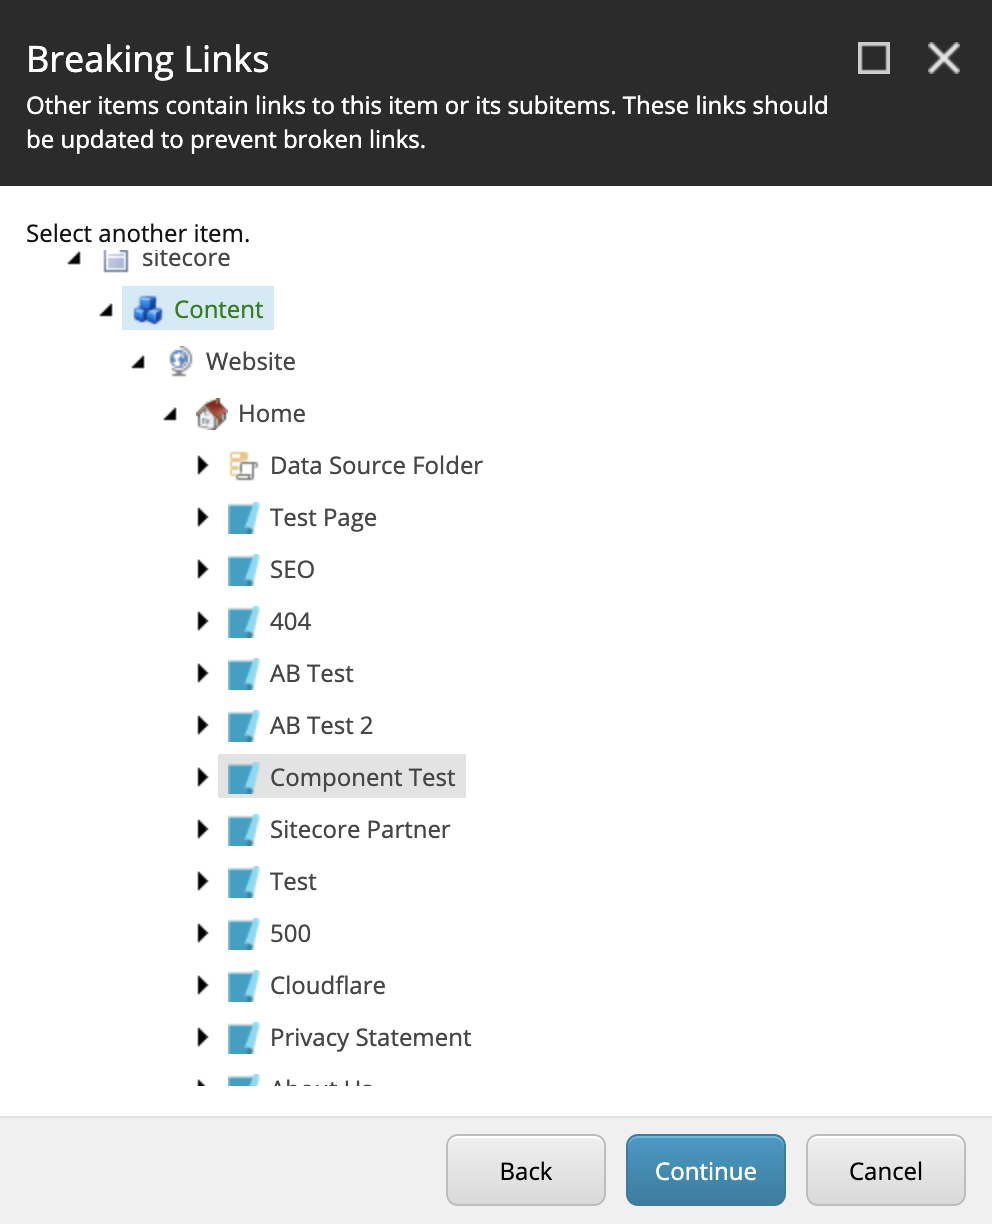 Select a new item to relocate links to in the Sitecore content tree